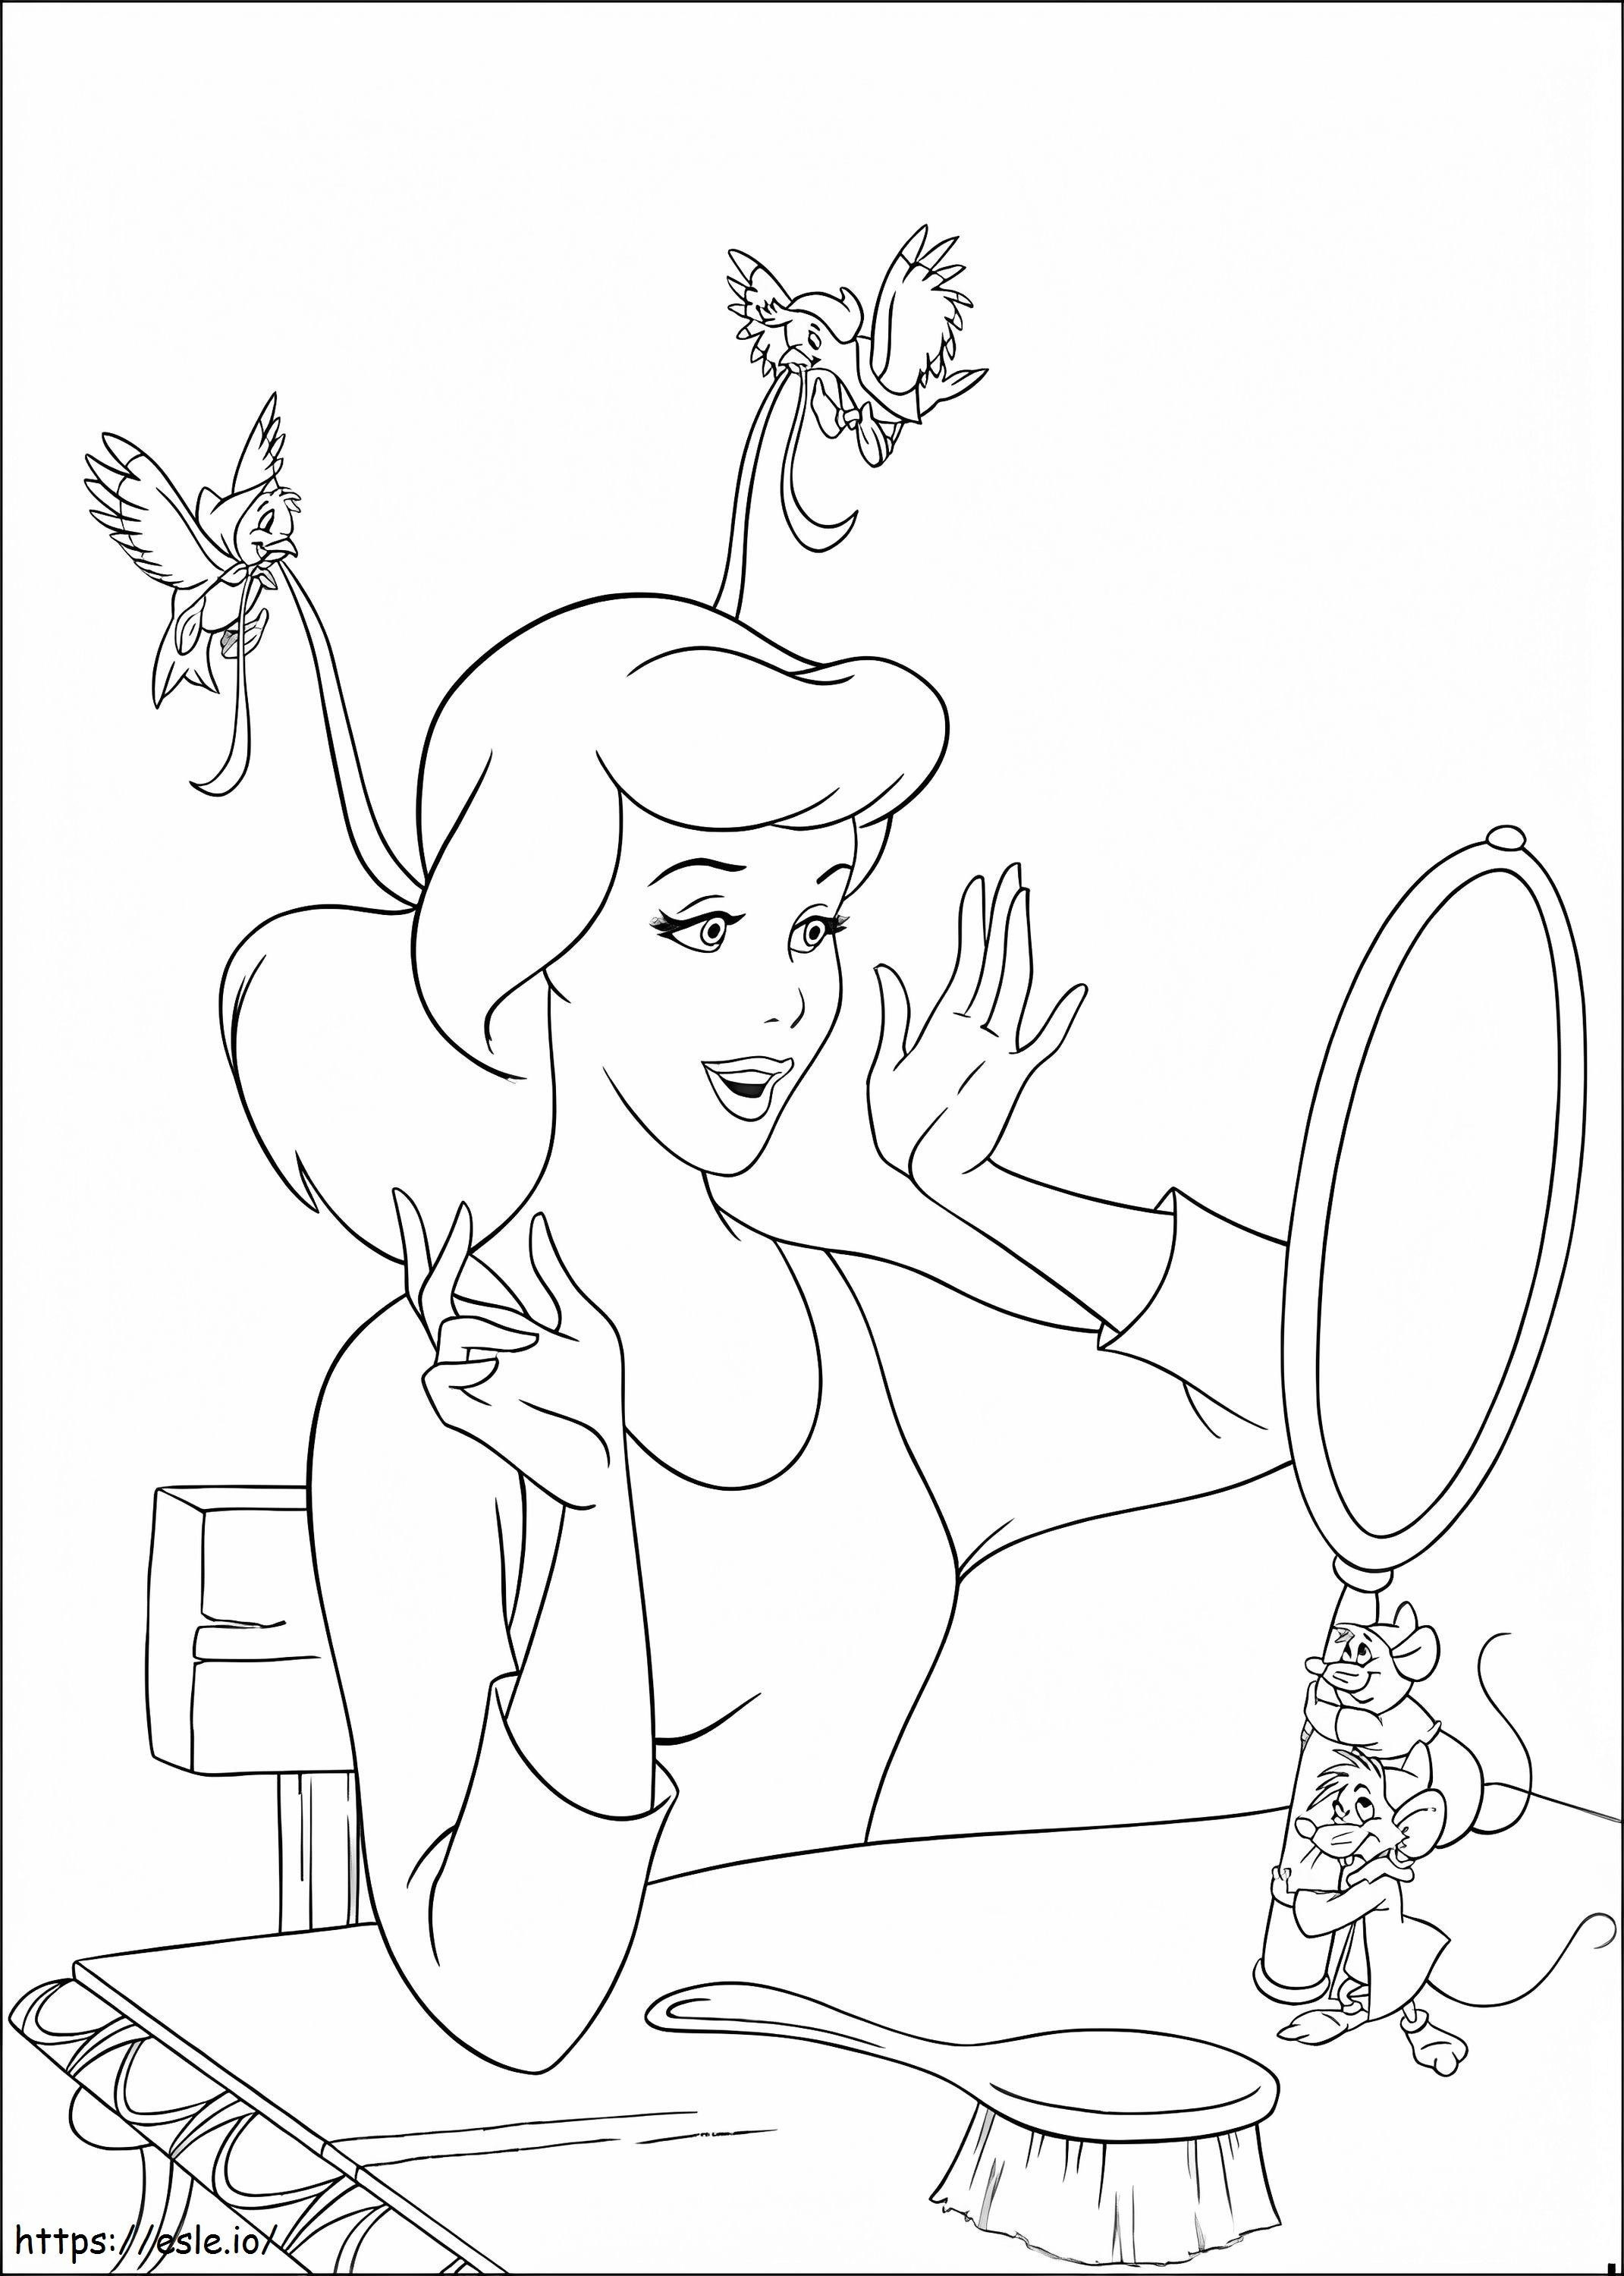 Cinderella With Her Friends coloring page